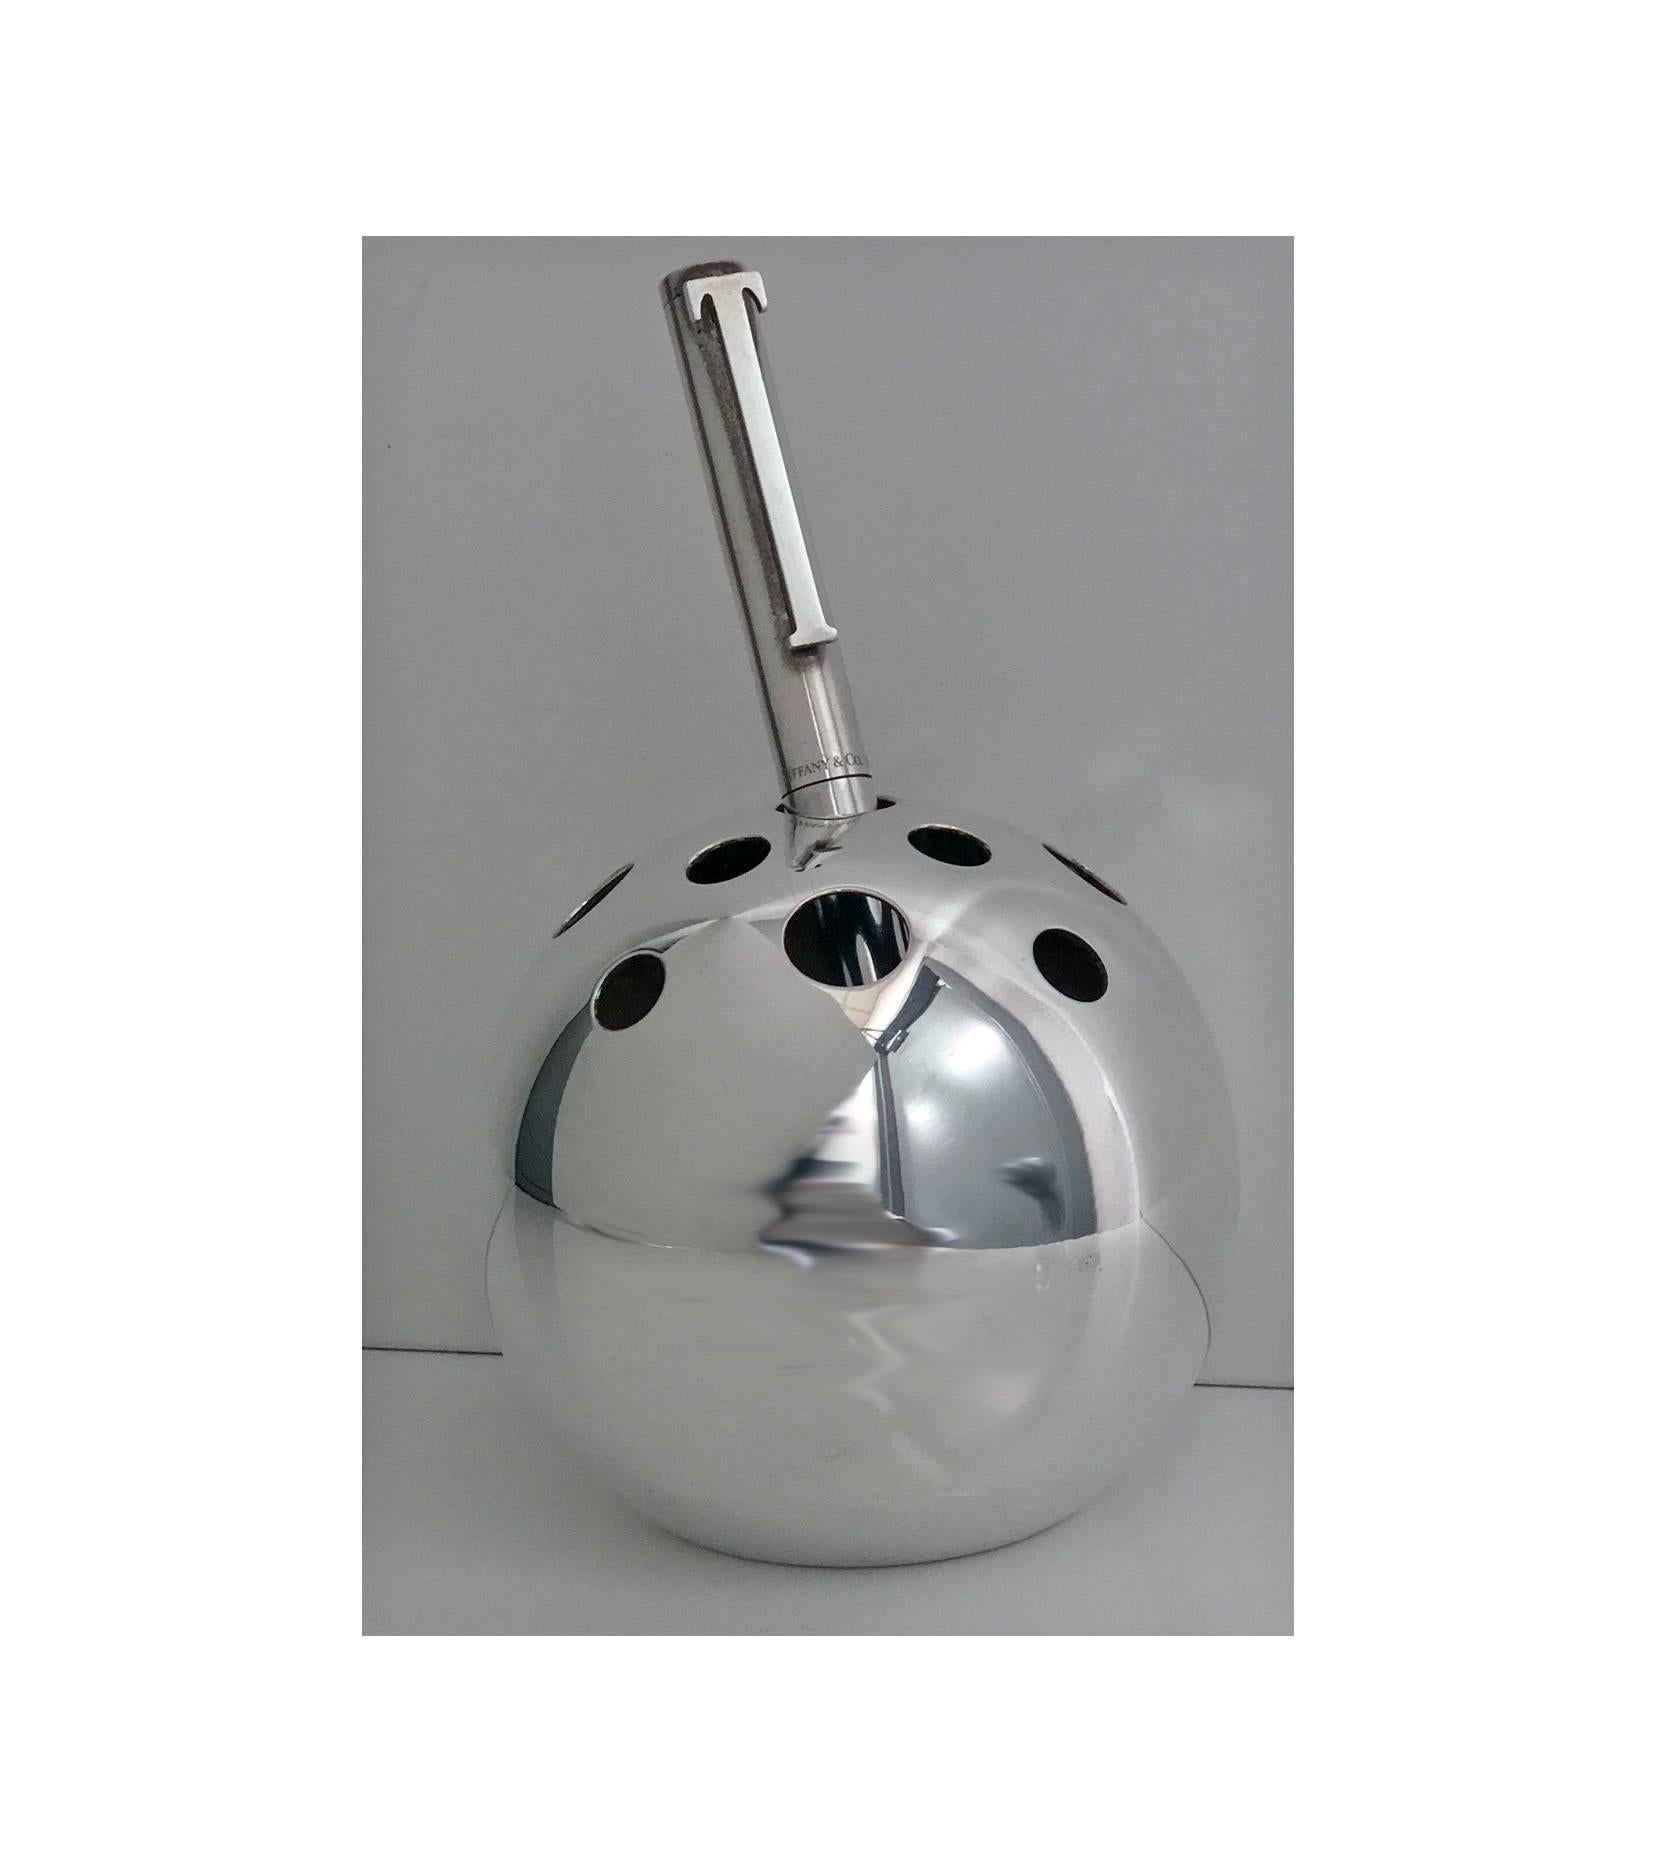 Mid-Century Modernism, Fratelli Cacchione silver desk sculpture for Pens and Pencil, Italian, circa 1955. The holder of spherical form, plain polished silver, allowing for up to twelve assorted size writing instruments. Hallmarked on base F.C. Milan